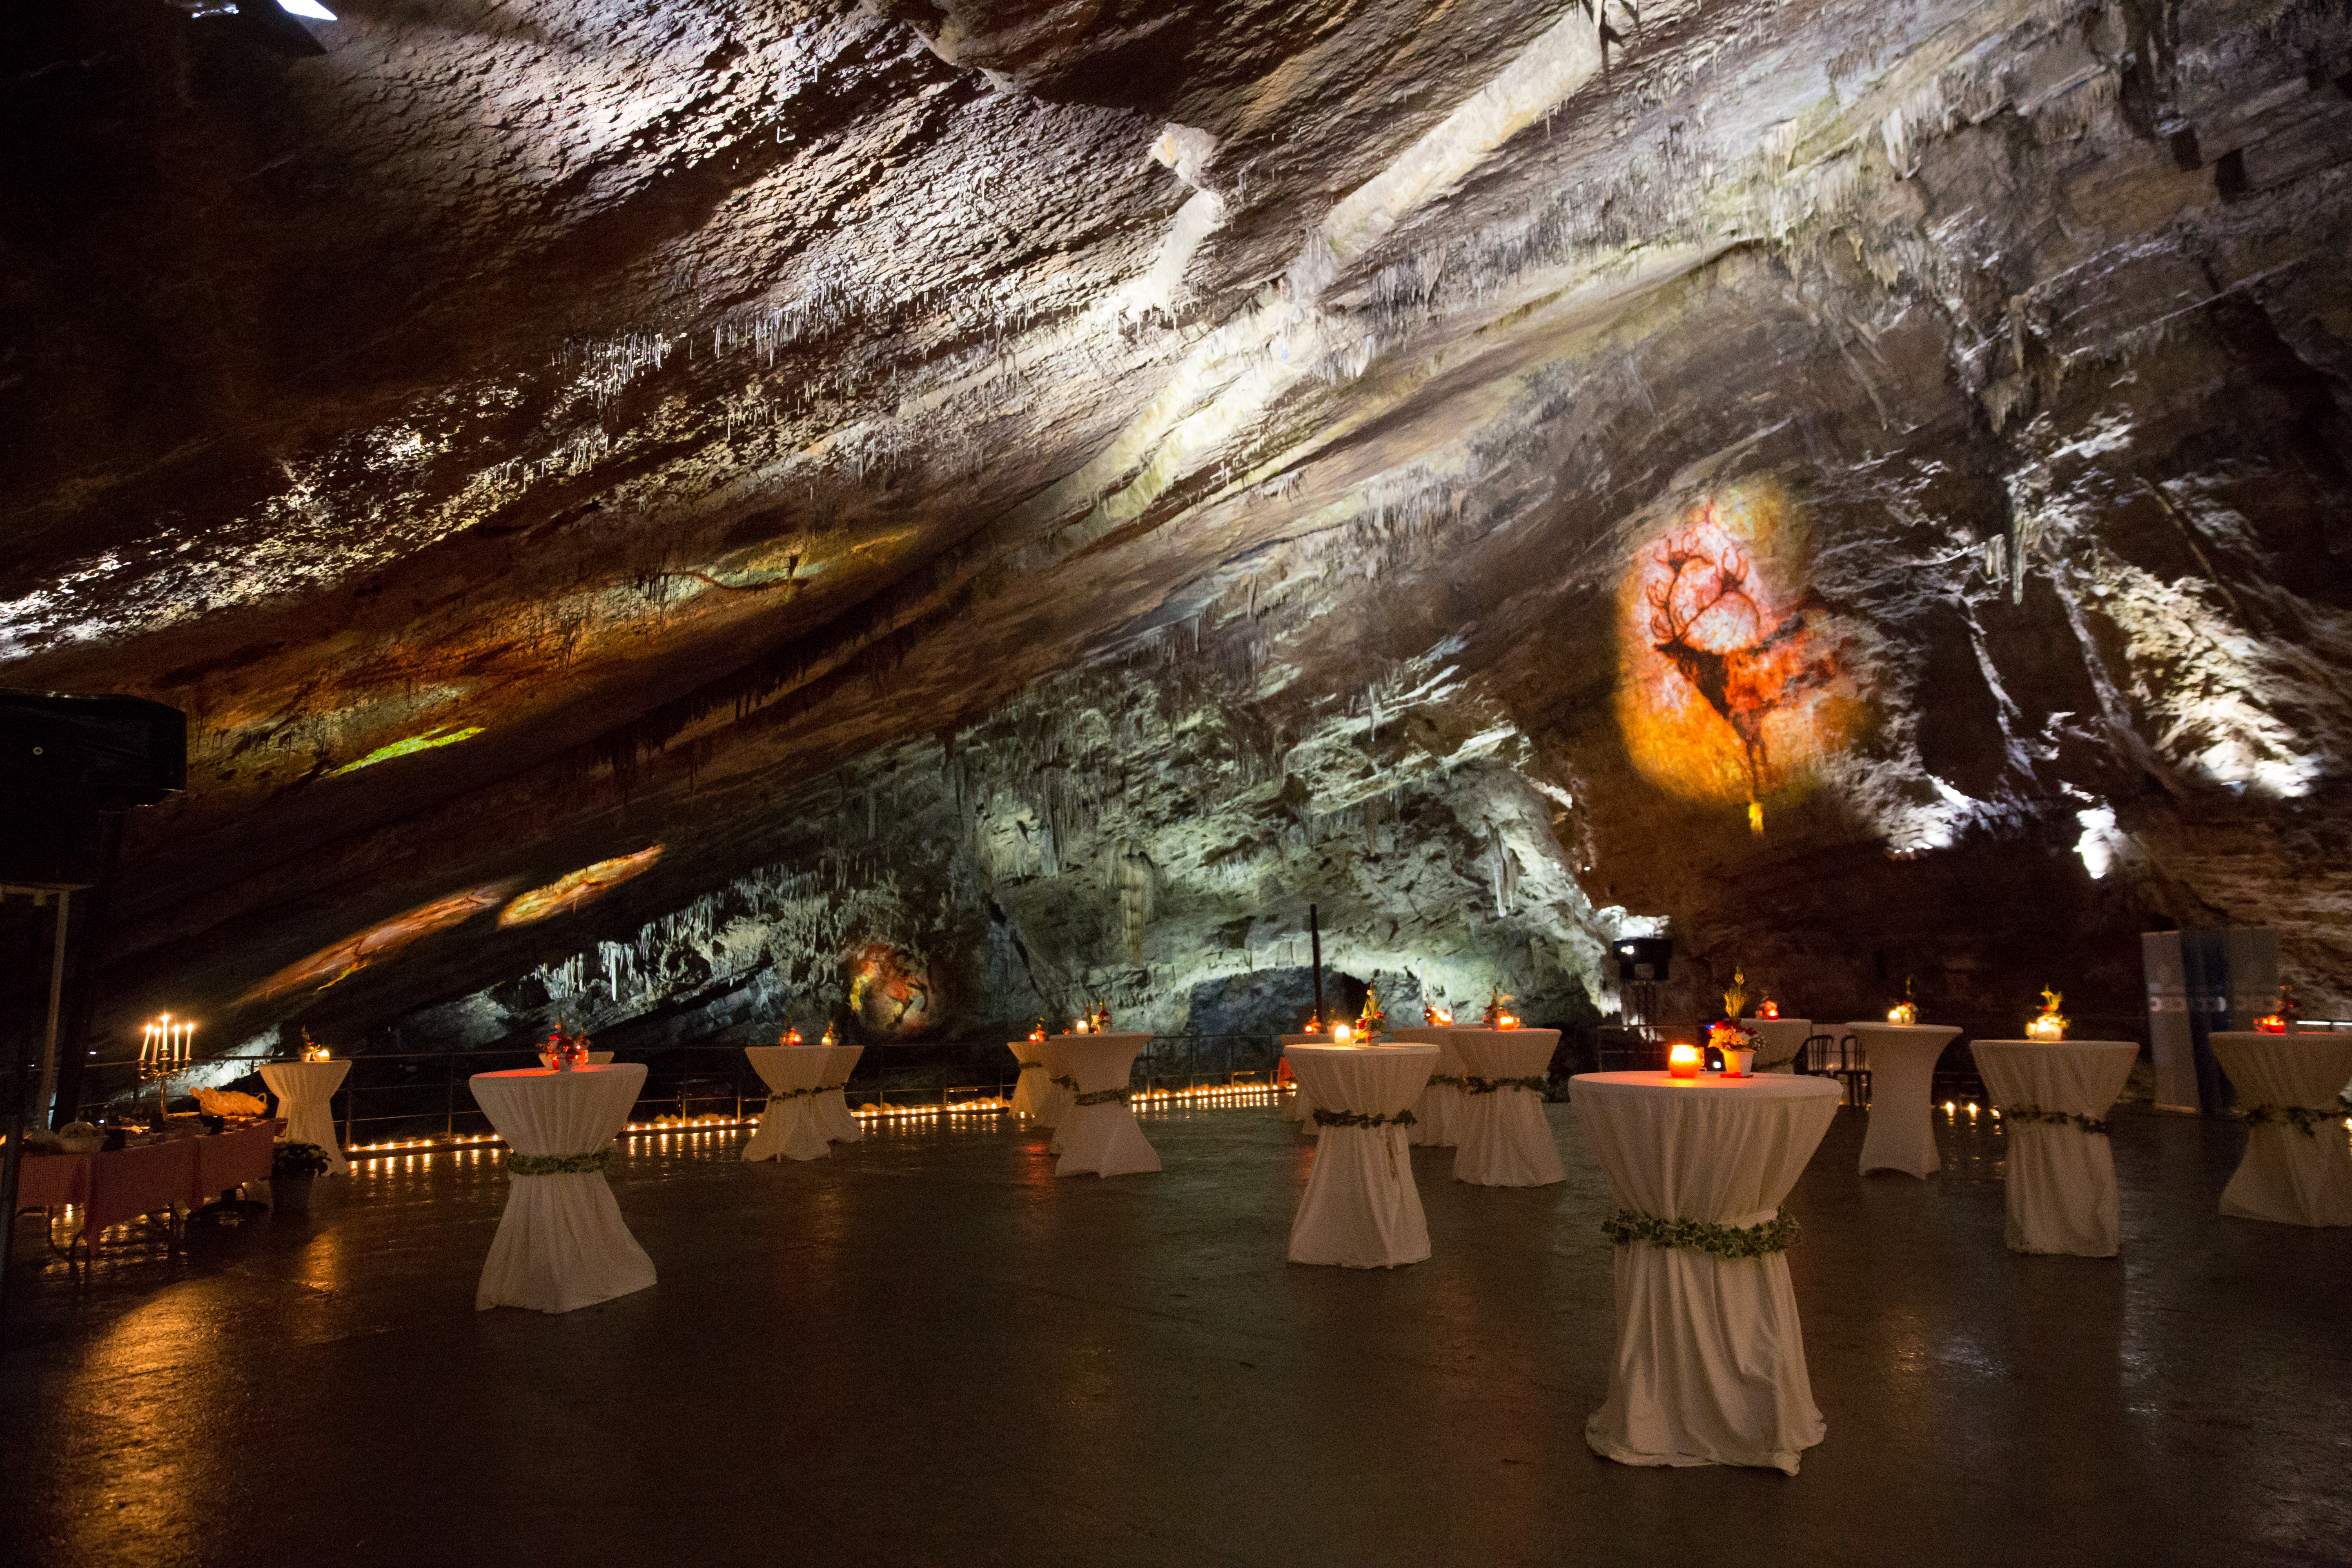 Grottes de Han - Dinner in the caves - salle